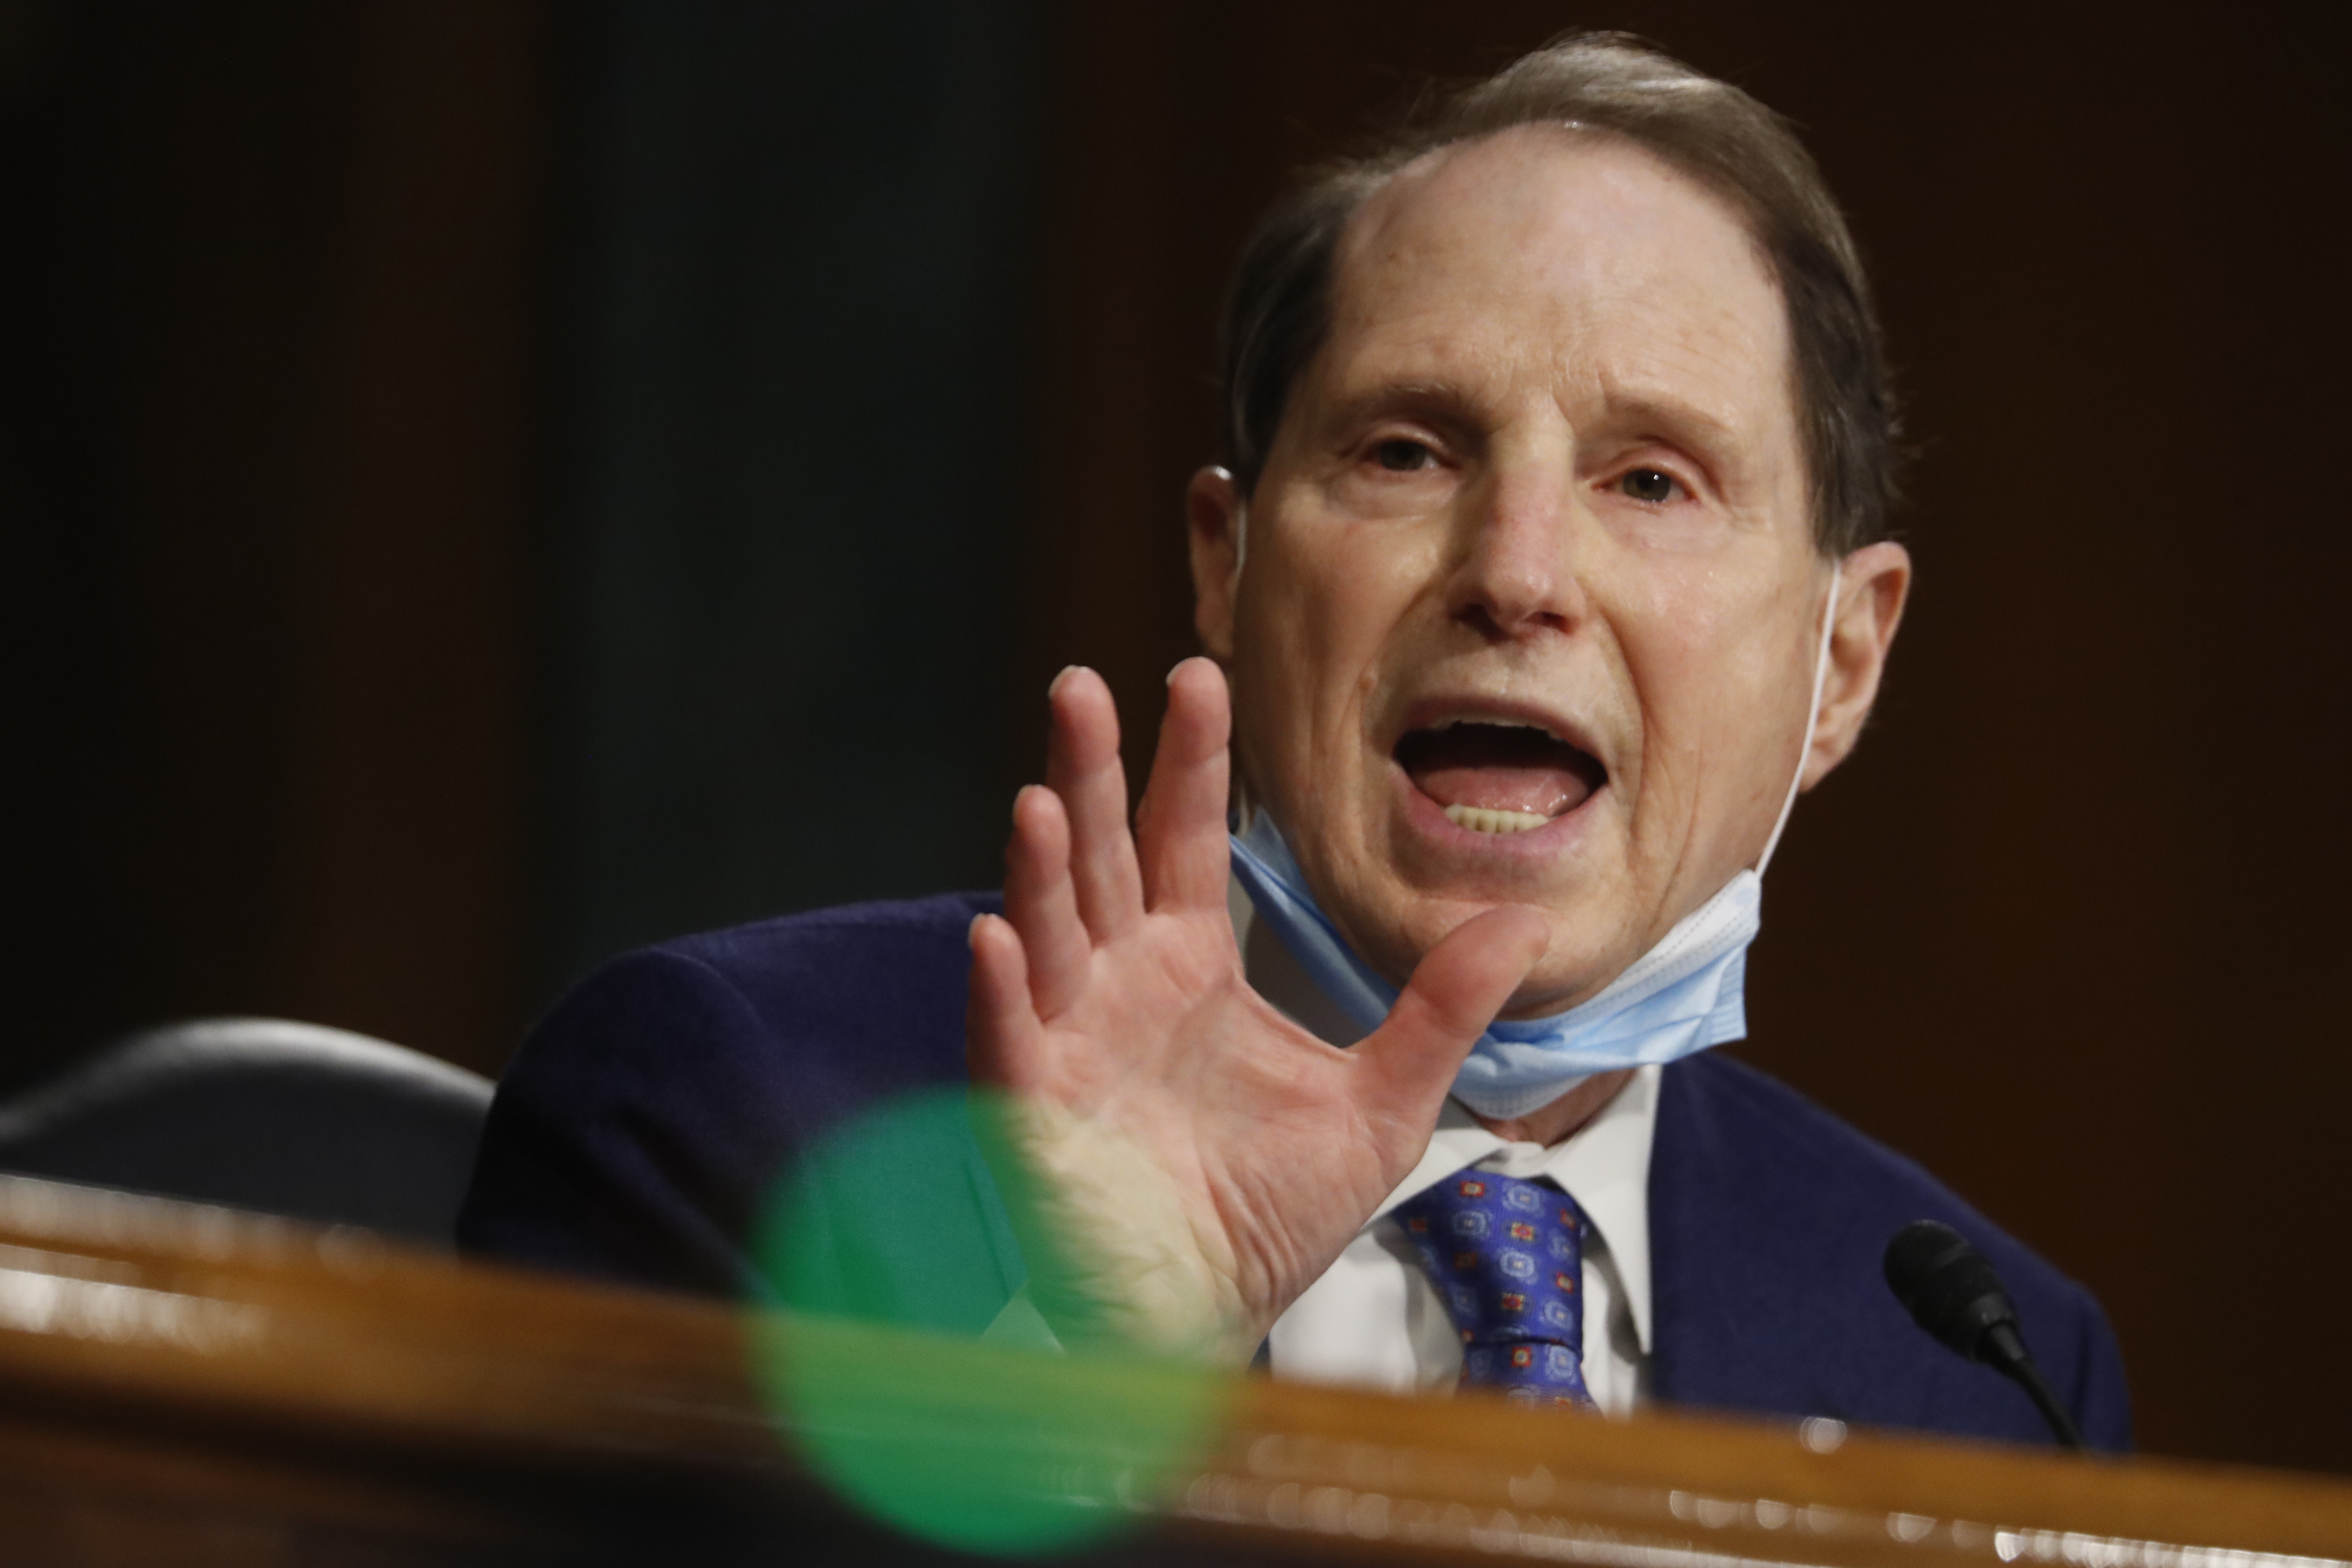 Sen. Ron Wyden speaks during the Senate Intelligence Committee nomination hearing for Rep. John Ratcliffe on May 5, 2020. (Photo: Andrew Harnik/Pool/AFP via Getty Images)